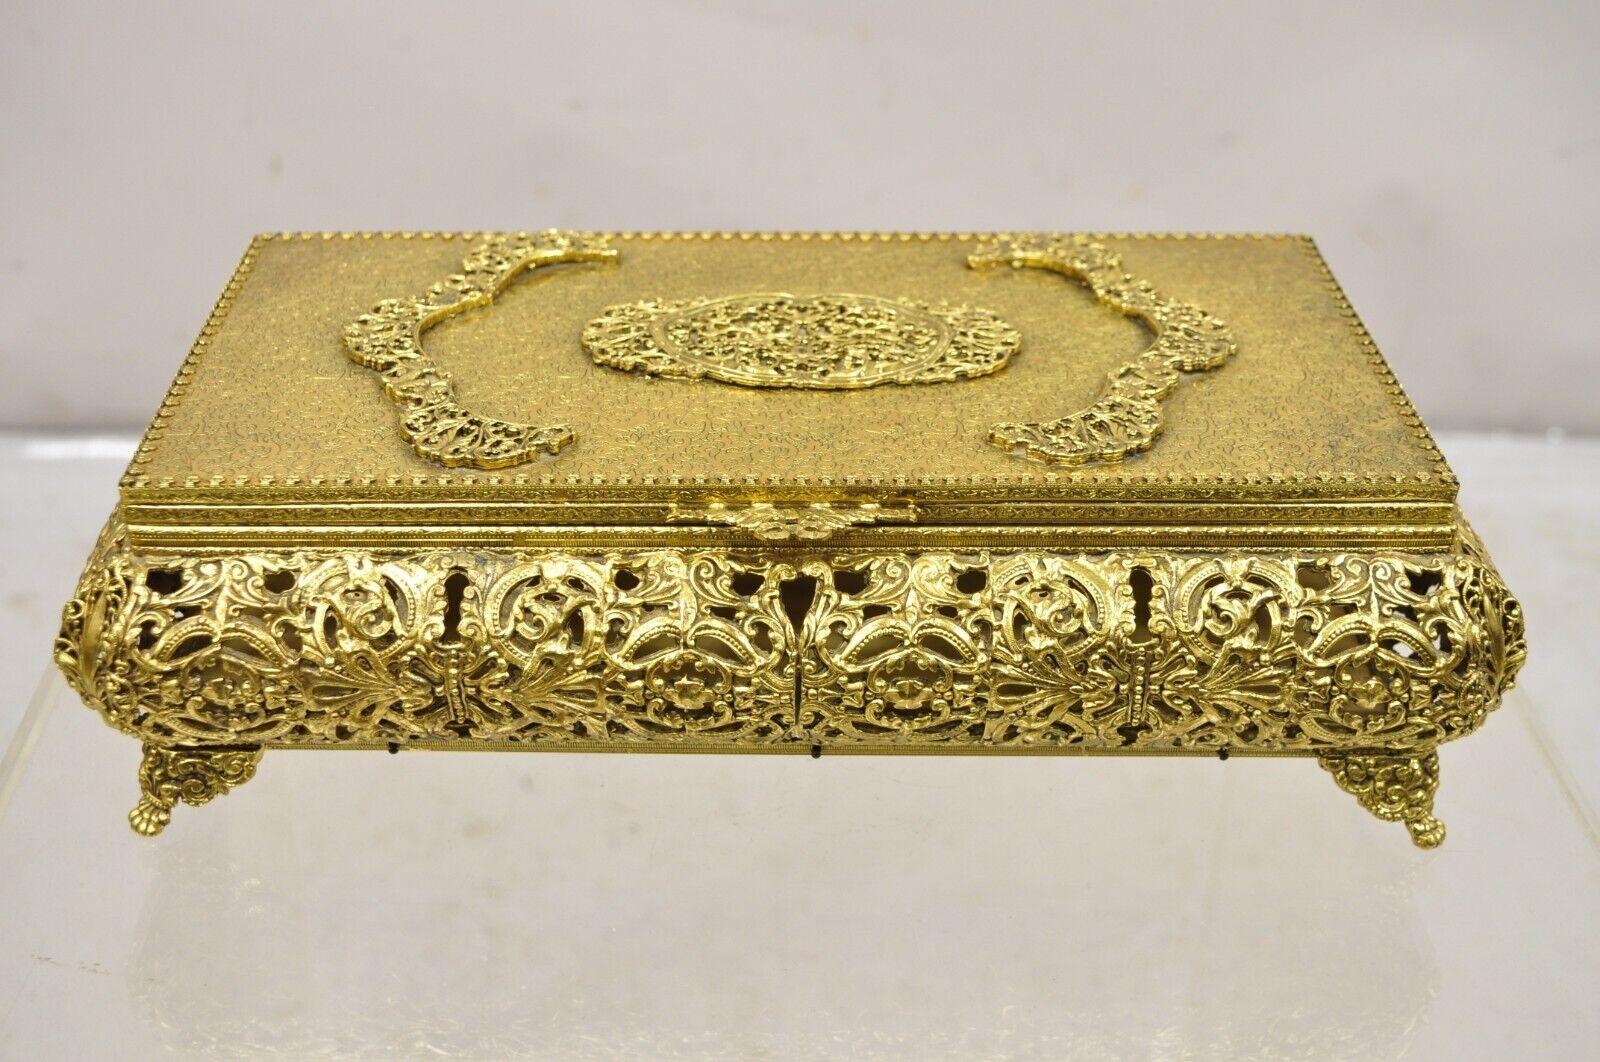 Vtg French Hollywood Regency Style Gold Filigree Vanity Jewelry Box by Globe For Sale 7